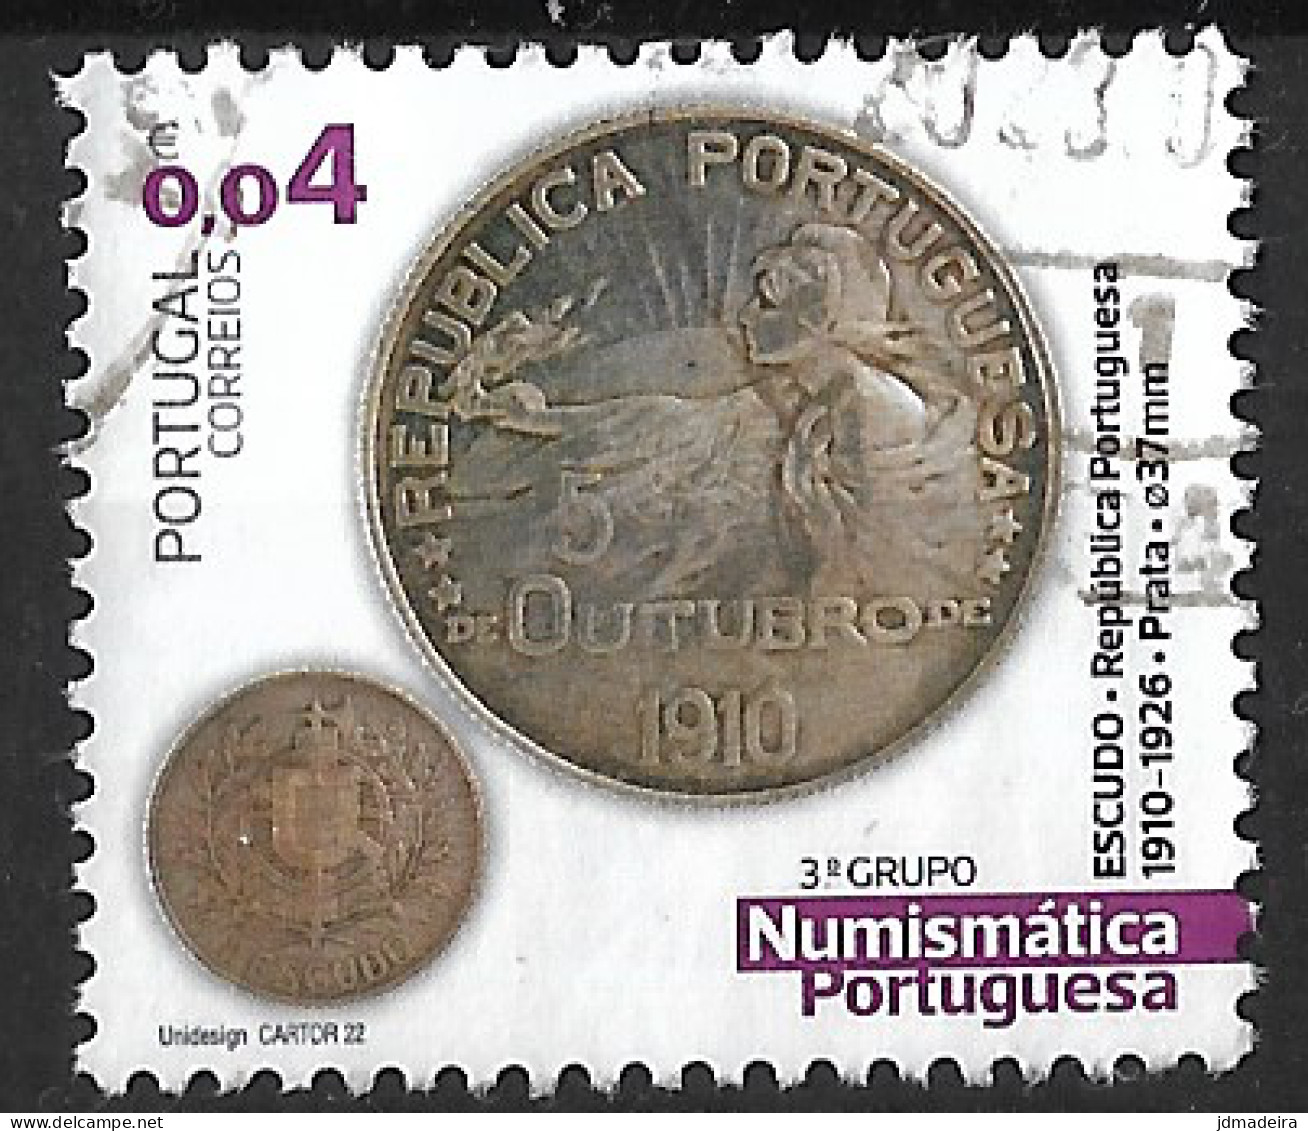 Portugal – 2022 Coins 0,04 Used Stamp - Gebraucht